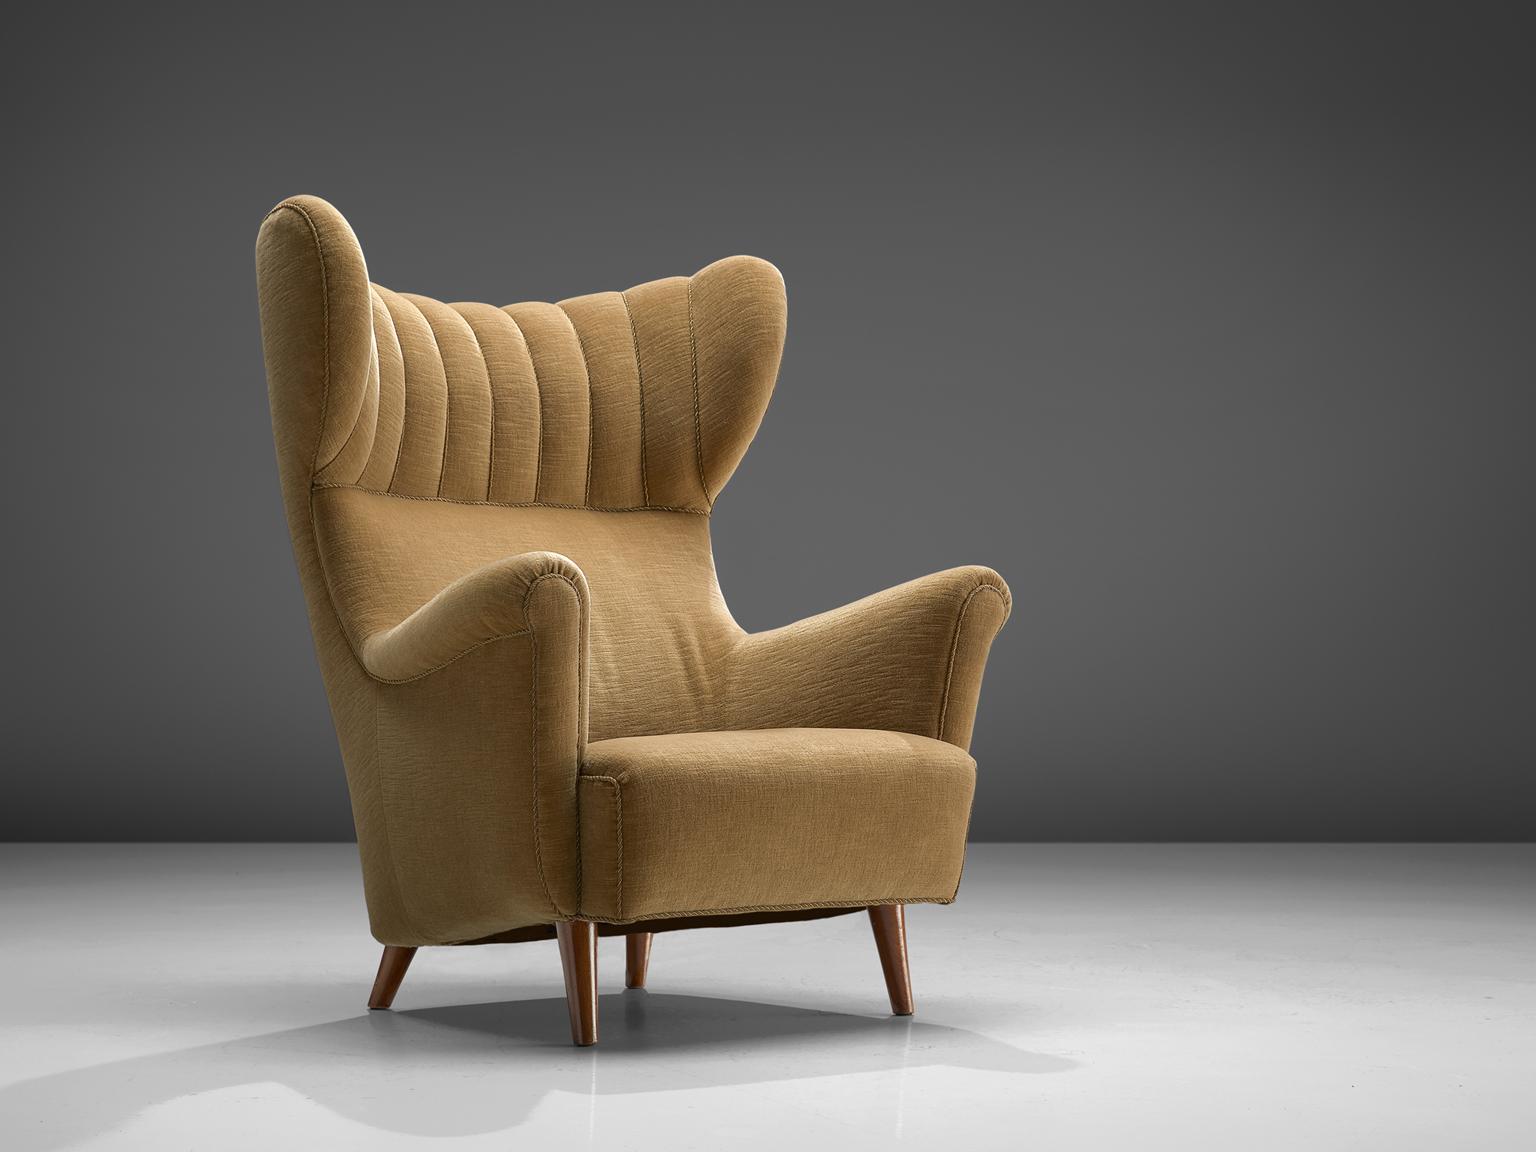 Wingback chair, pastel yellow velvet and teak, Denmark, 1940s

This voluptuous wingback chair with padded headrest and sloping armrests is typical for early Midcentury Danish design. The borders of this chair are finished with piping. The legs are